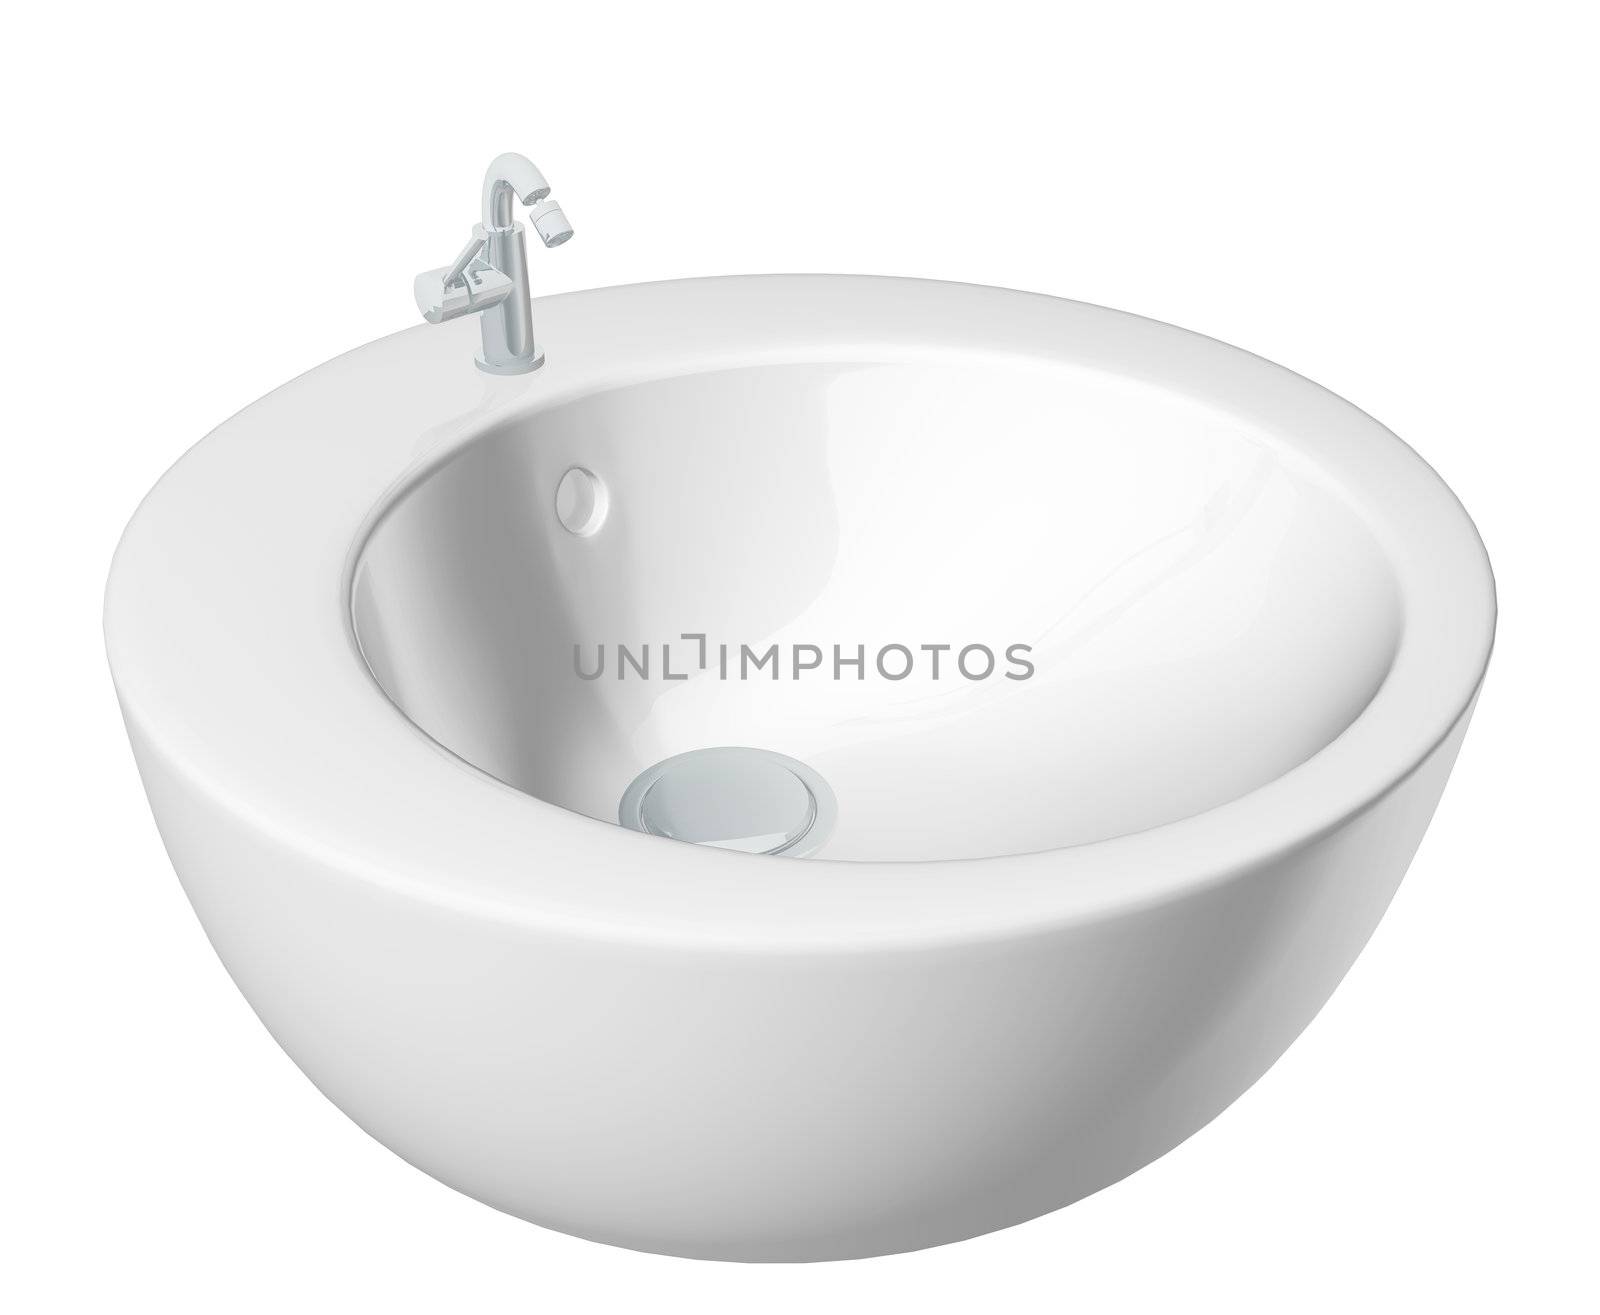 Modern round washbasin or sink, cream colored, isolated against a white background.